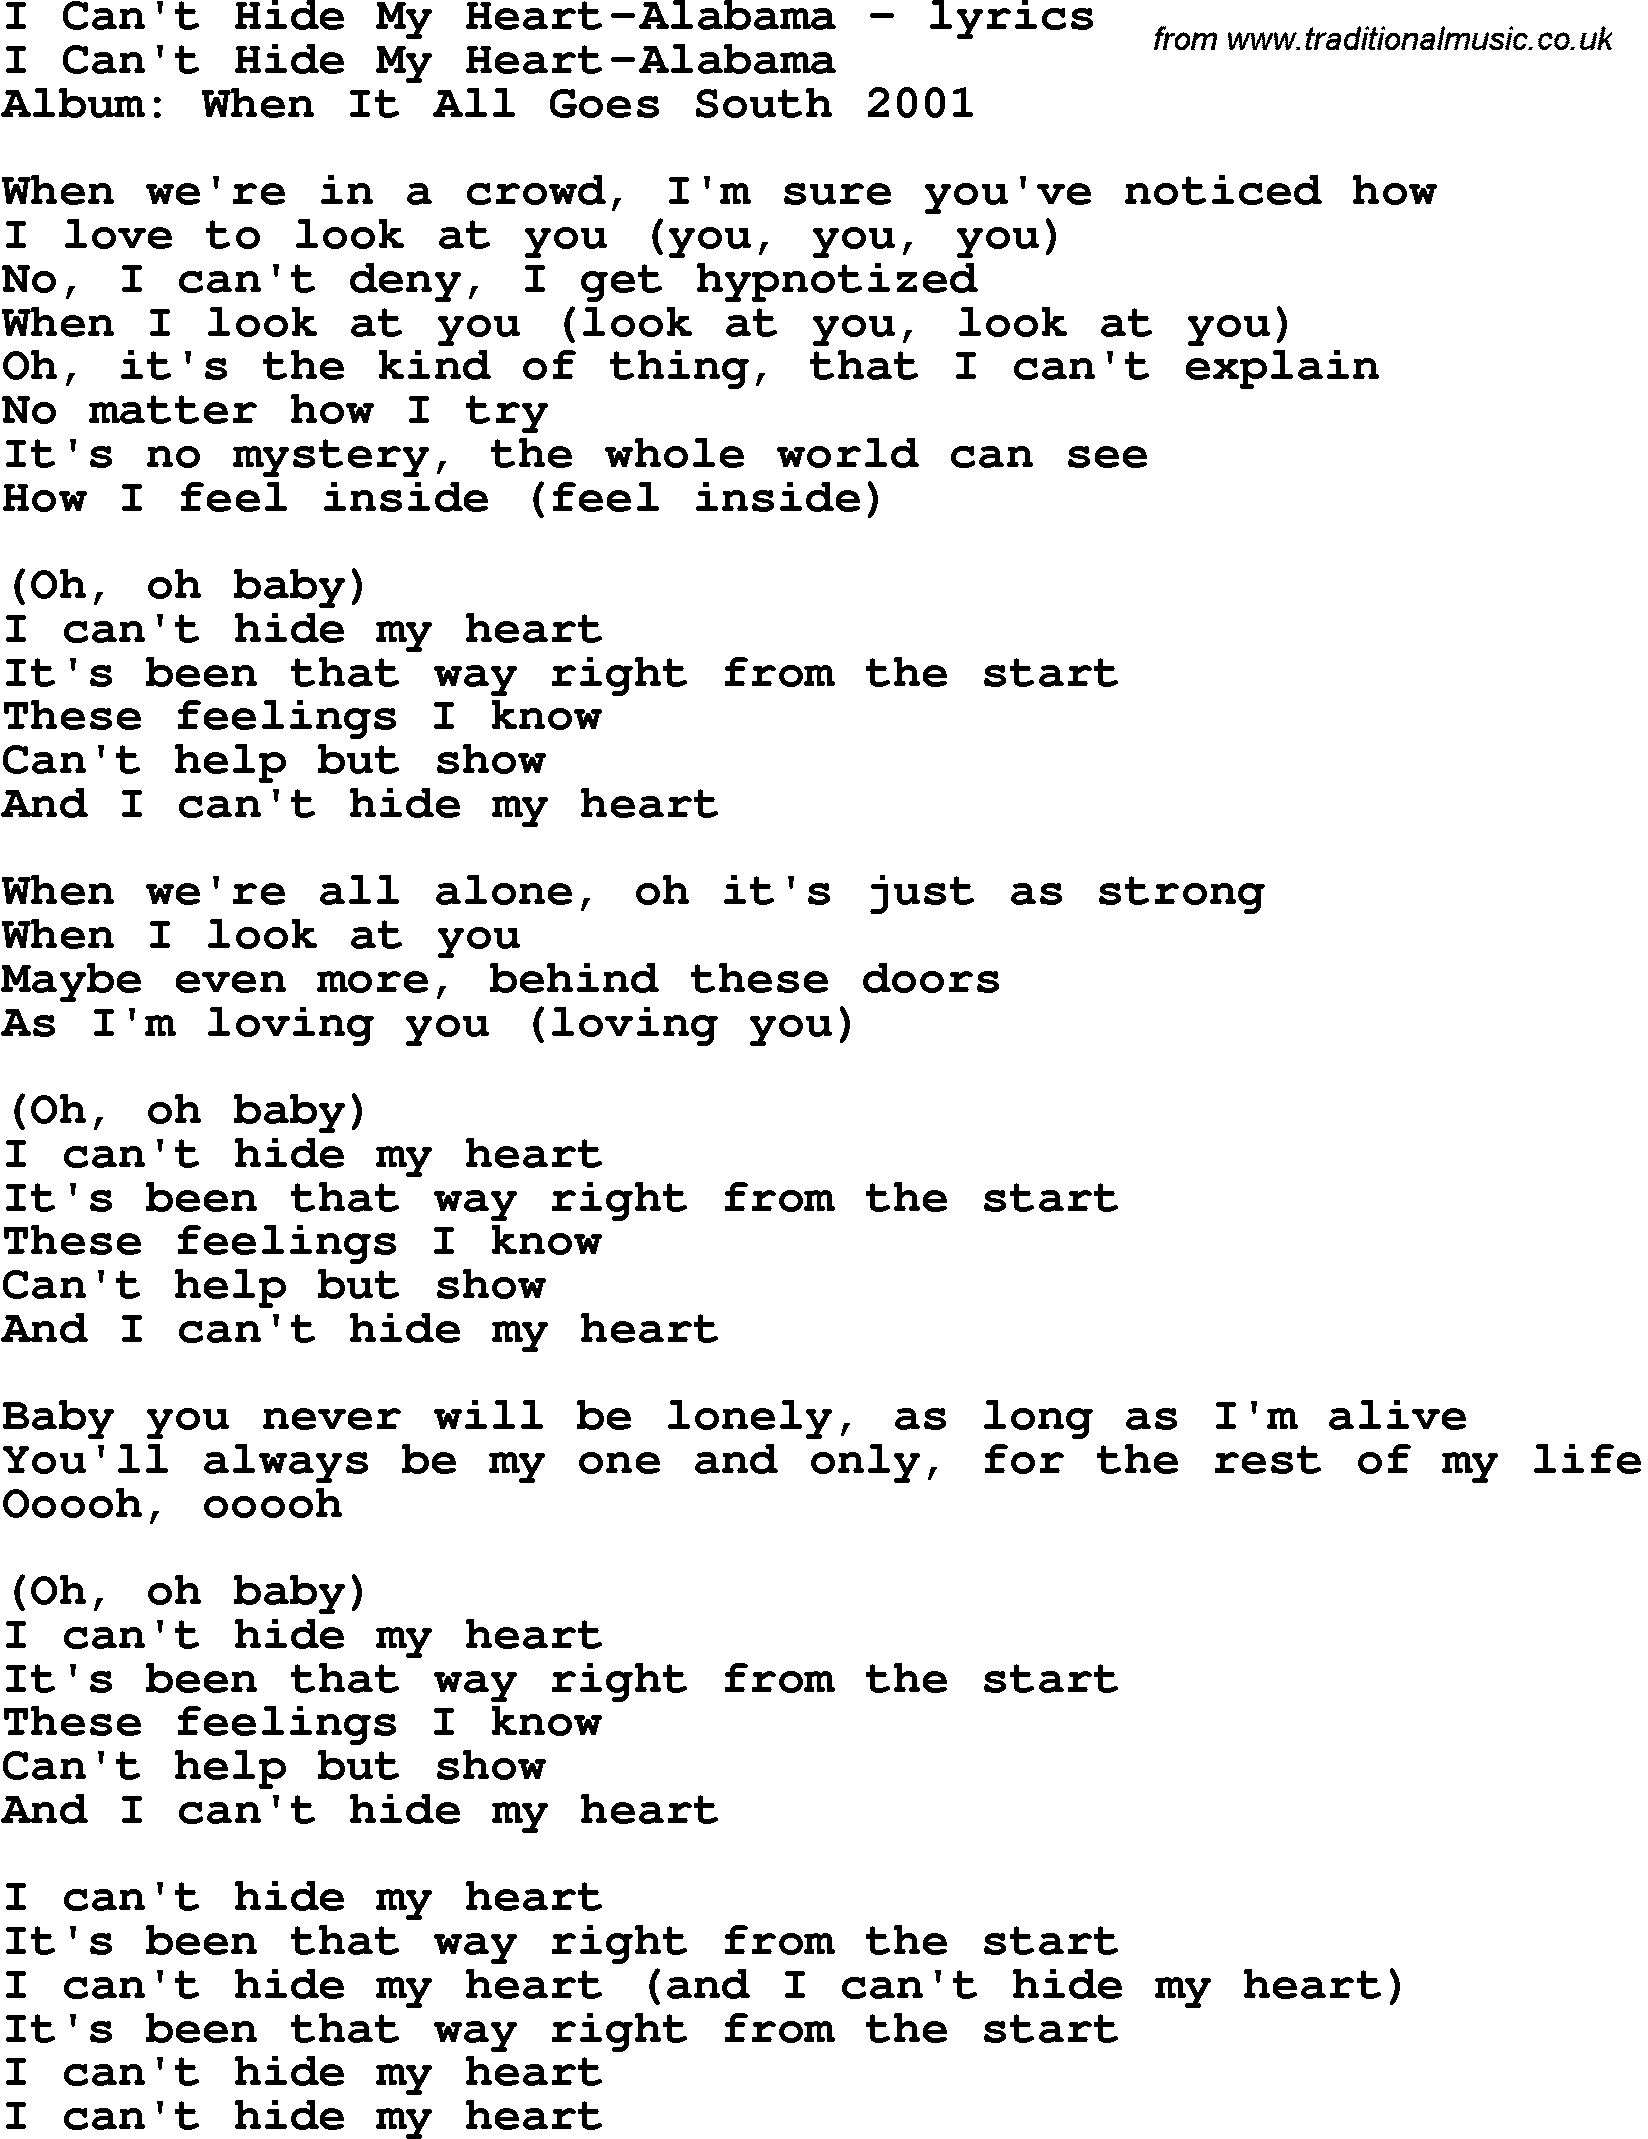 Love Song Lyrics for: I Can't Hide My Heart-Alabama